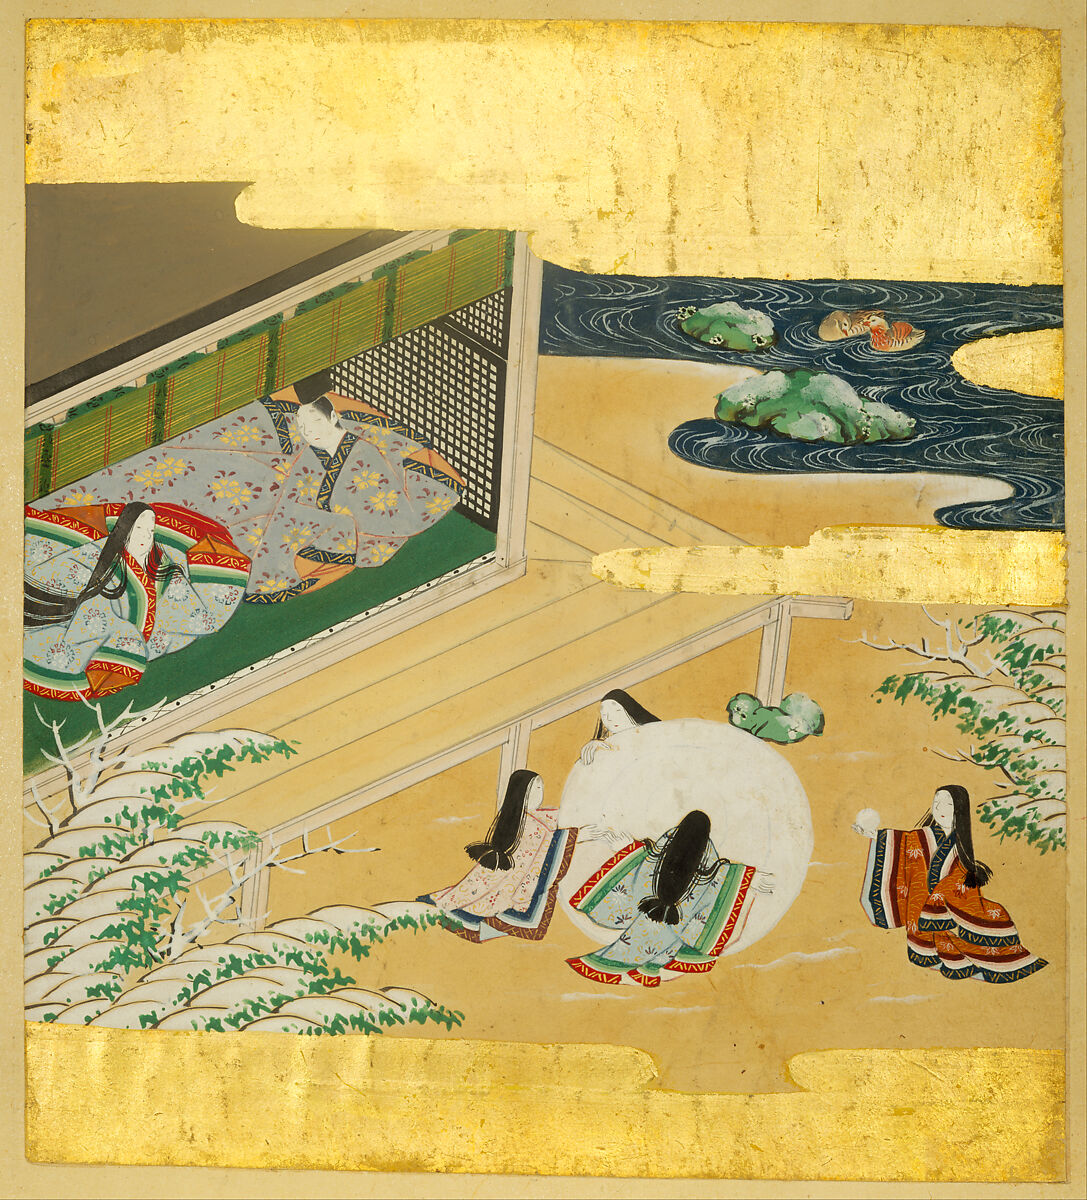 The Tale of Genji (Genji Monogatari), Formerly attributed to Tosa Mitsusada (Japanese, 1738–1806), Set of twenty-four album leaves; ink, color, and gold on paper, Japan 